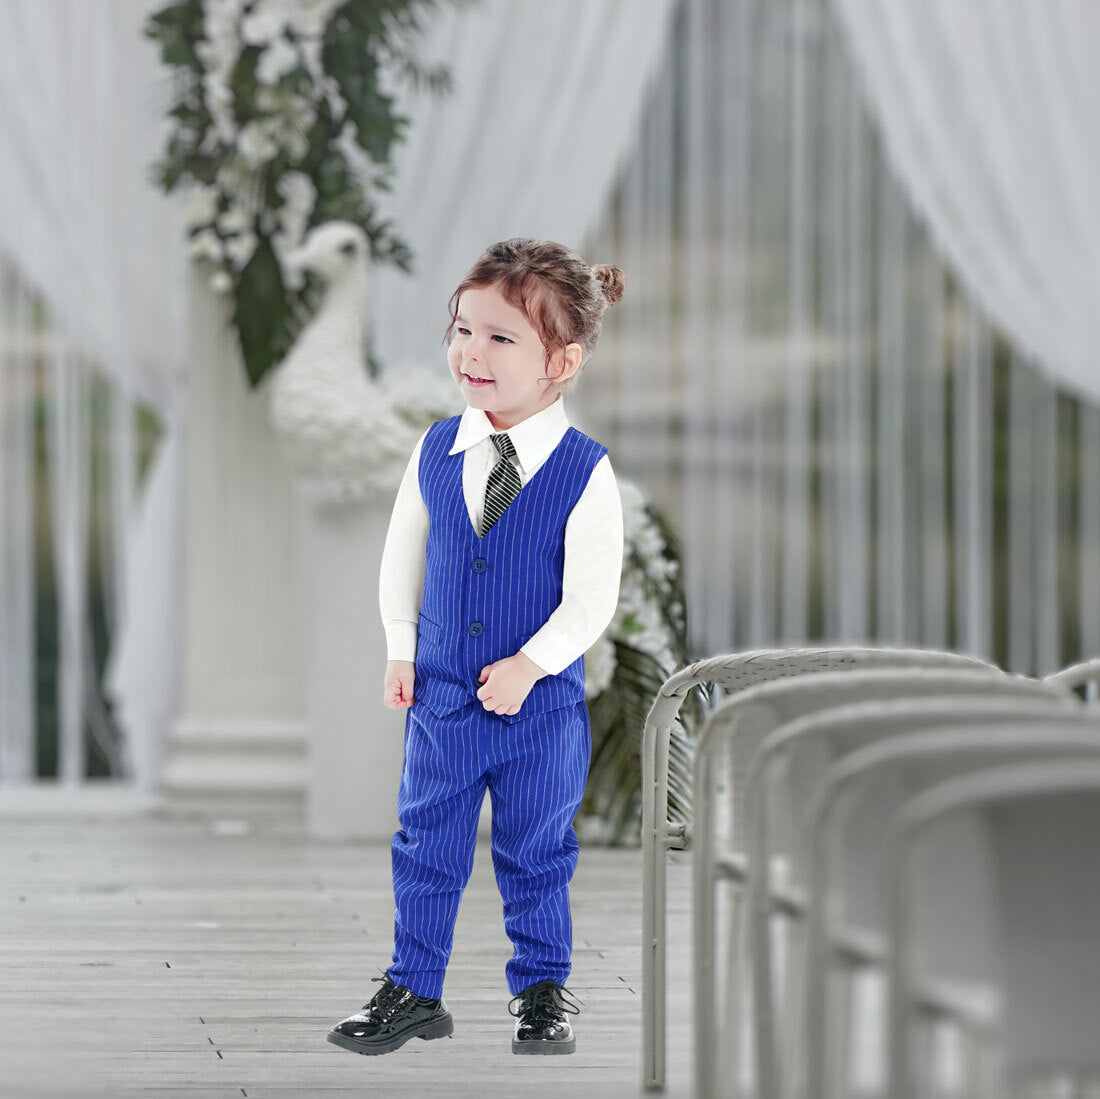 Toddler wearing blue striped pants and vest